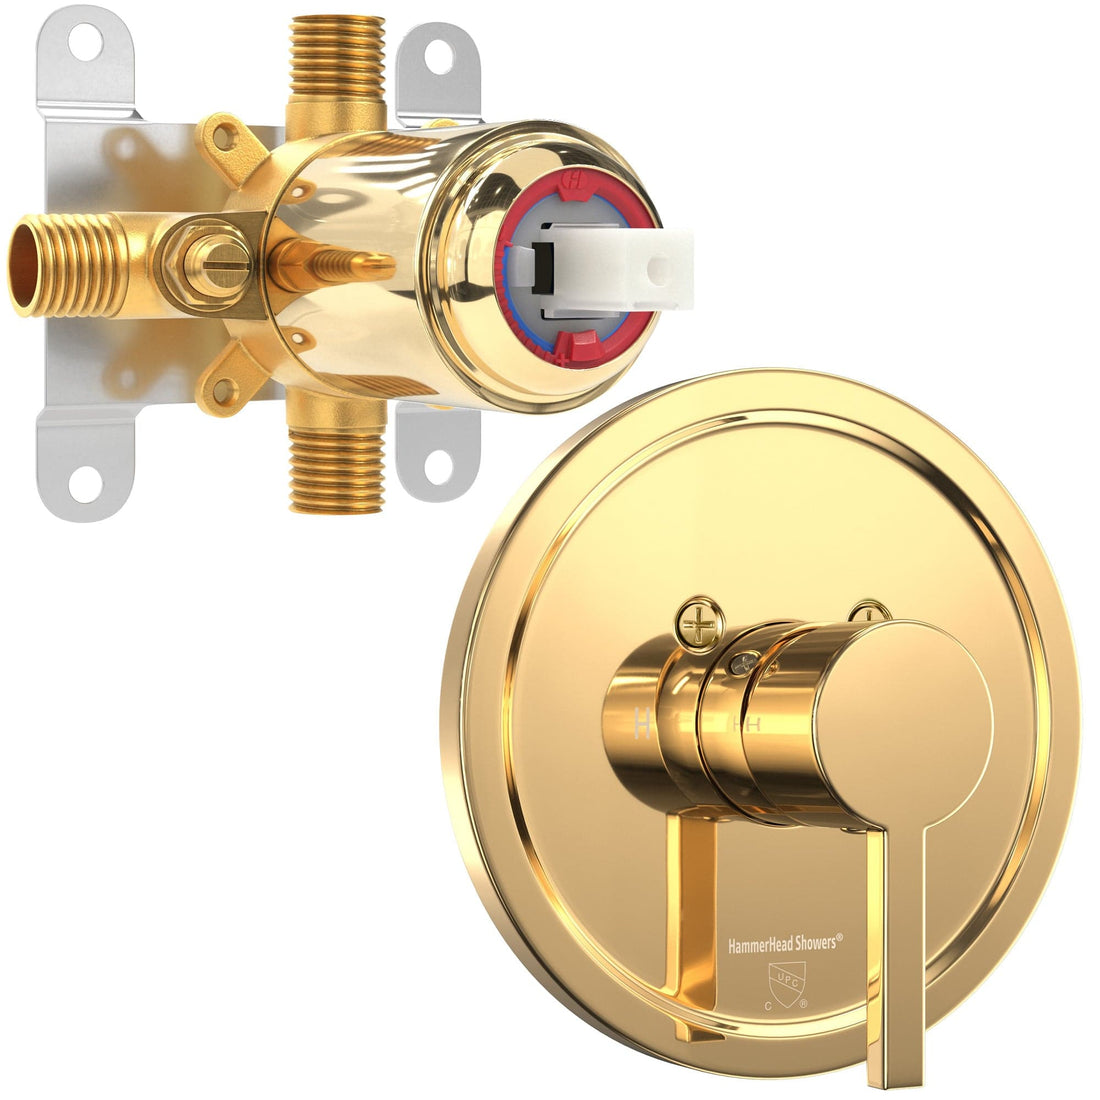 Main Image with Valve and Trim - All Metal 1-Handle Tub and Shower Valve with Trim Kit Polished Brass - The Shower Head Store